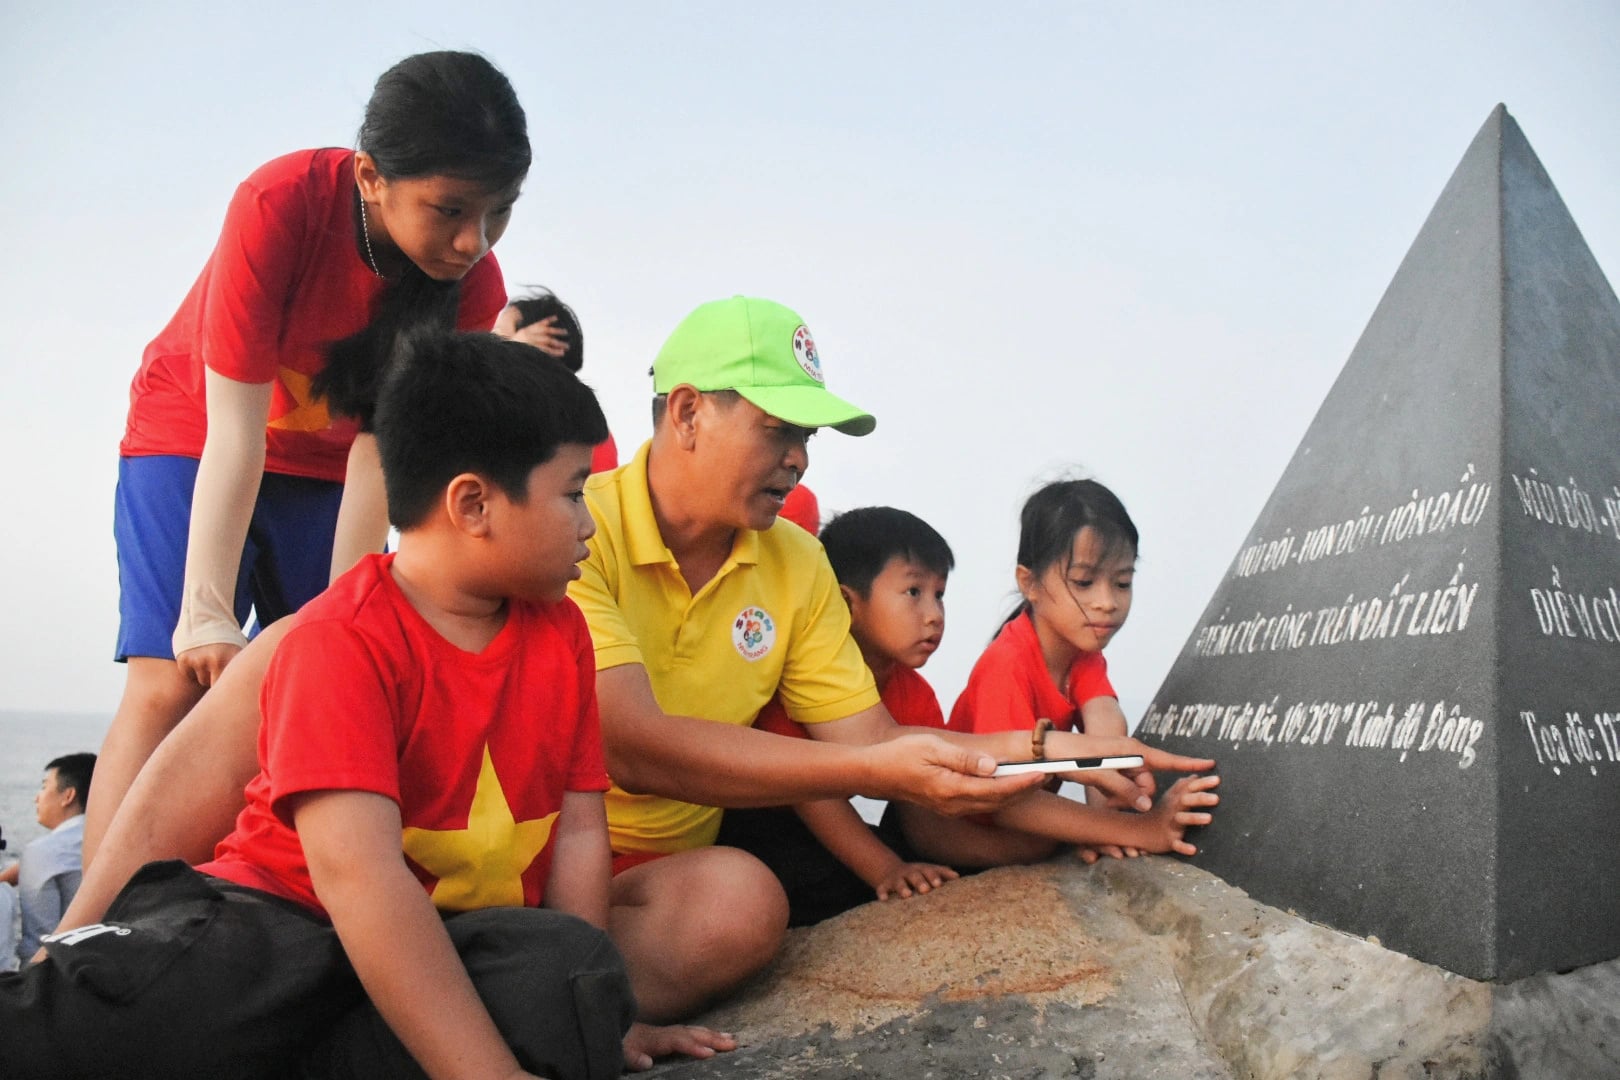 A man instructs the children about the coordinates and information on the landmark at Vietnam mainland's easternmost point. Photo: Tran Hoai